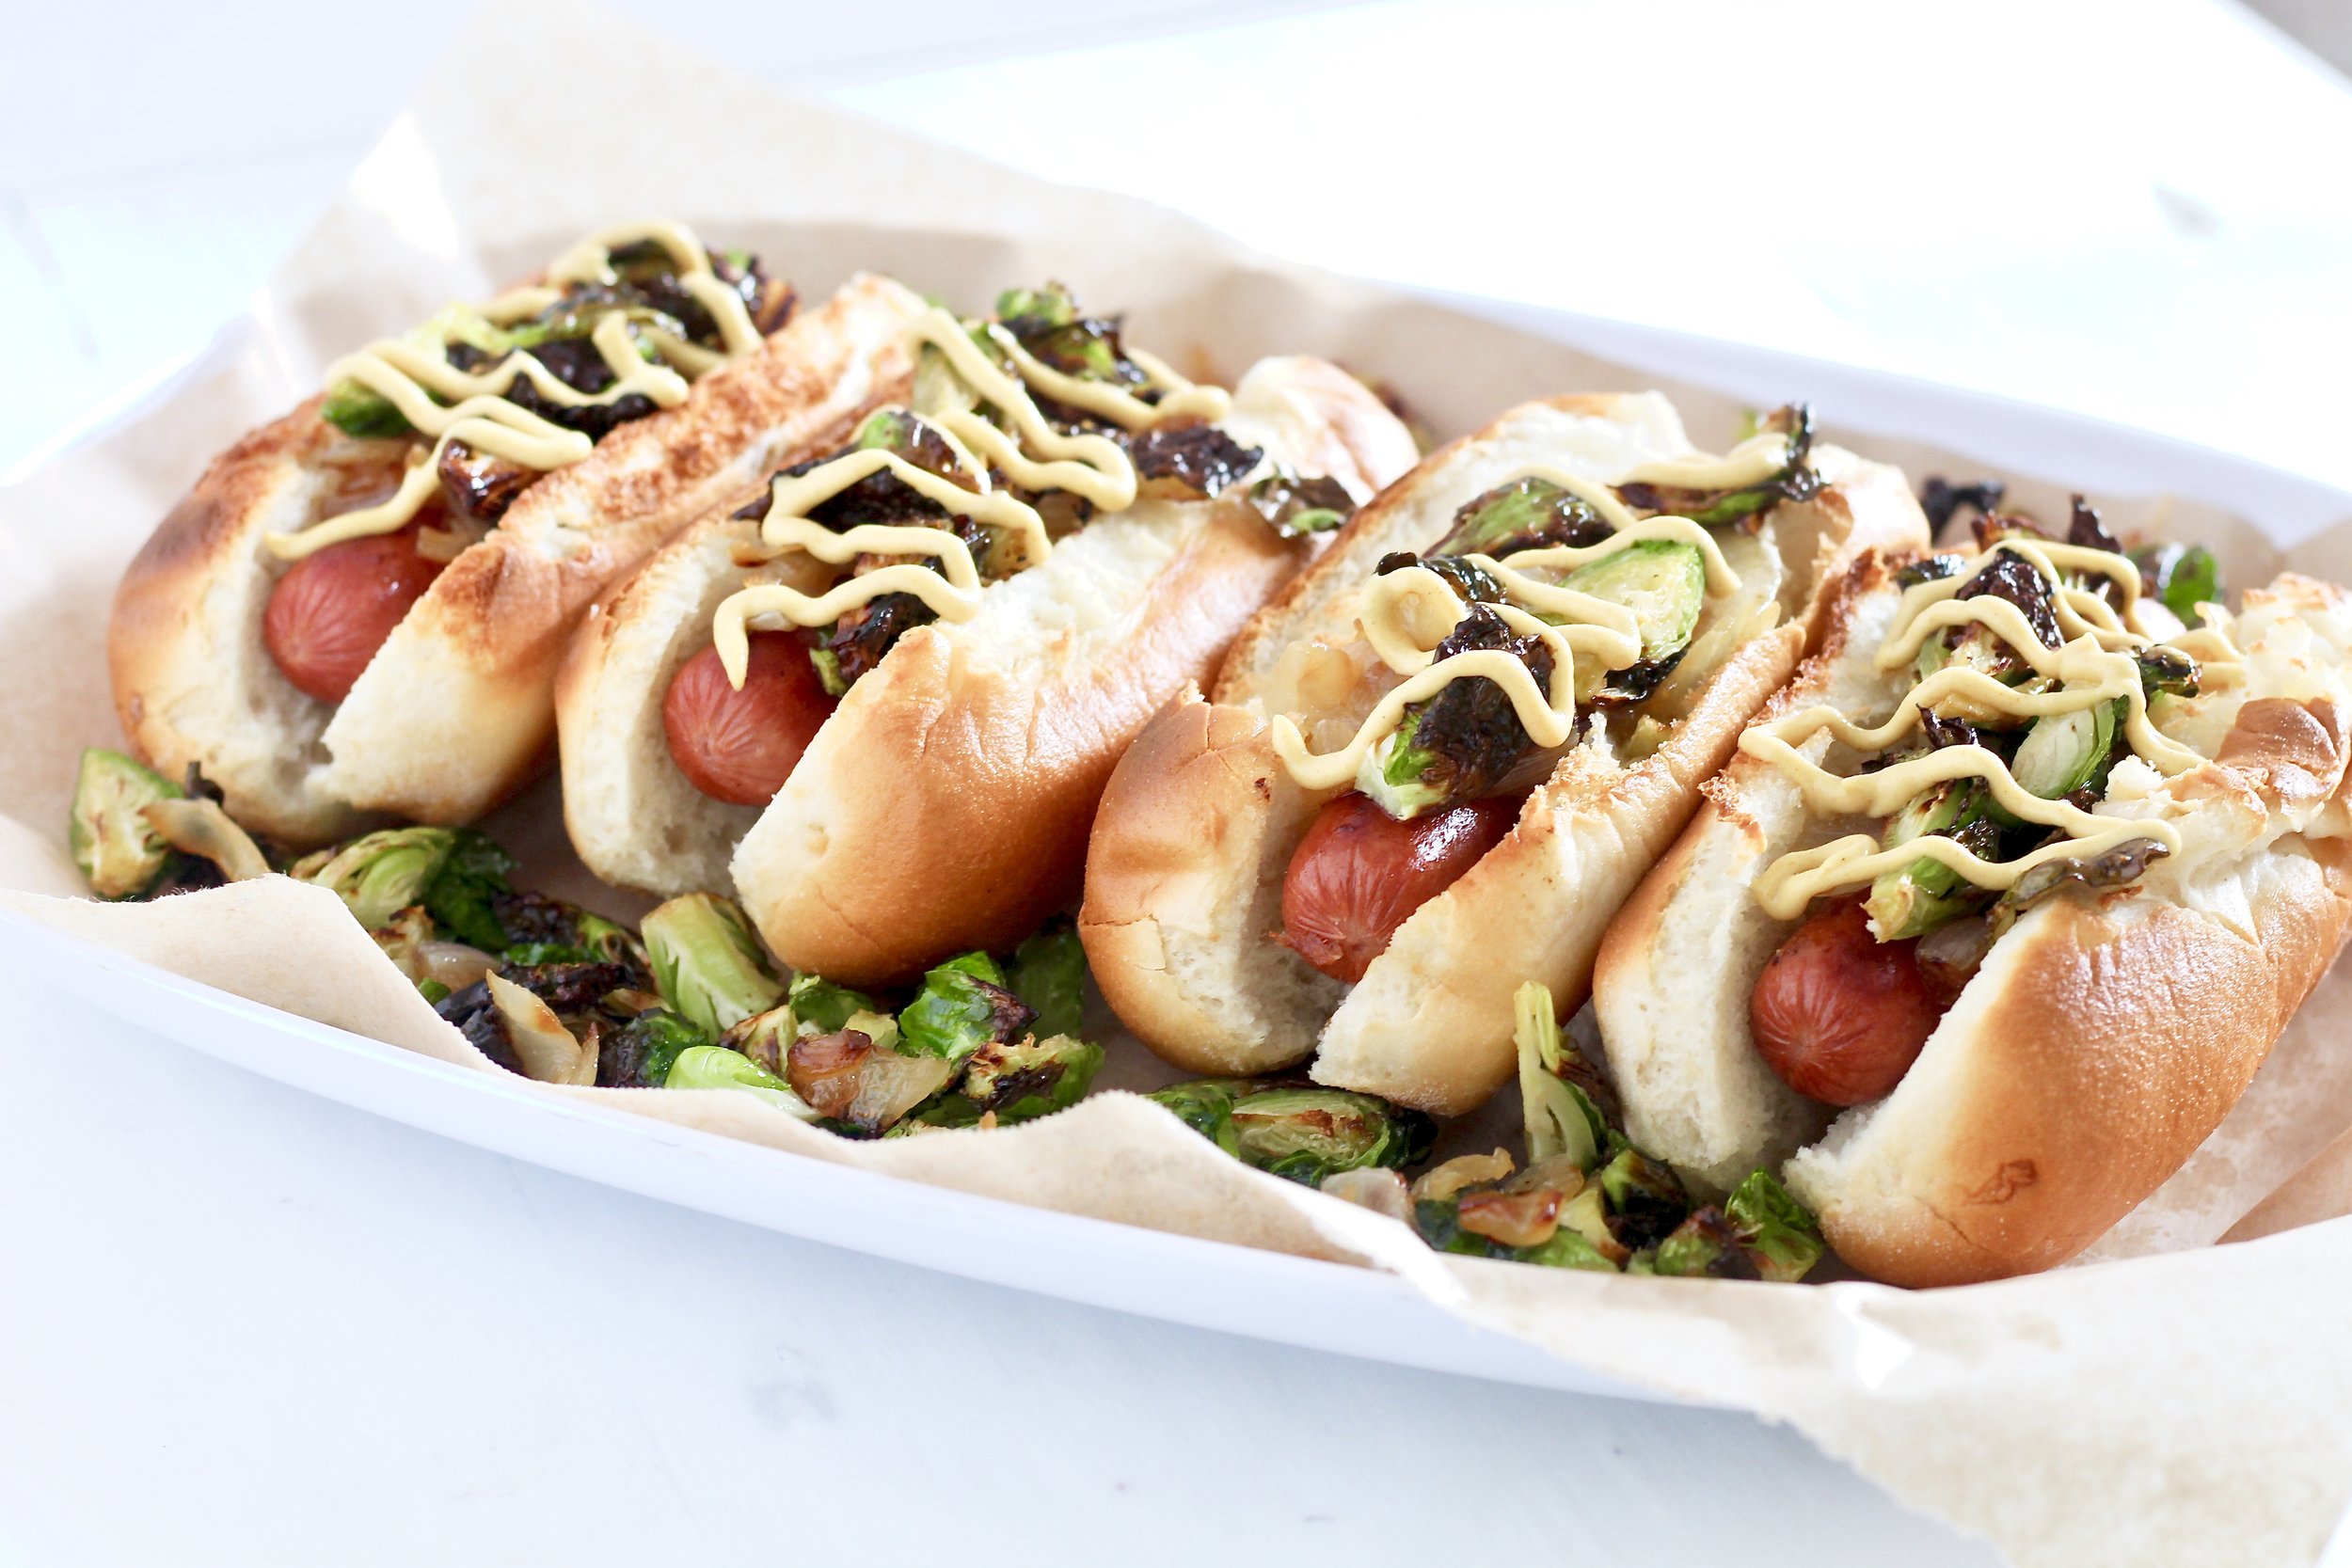  Celebrate National Hot Dog Day: Veggie Lovers’ Beef Hot Dogs 